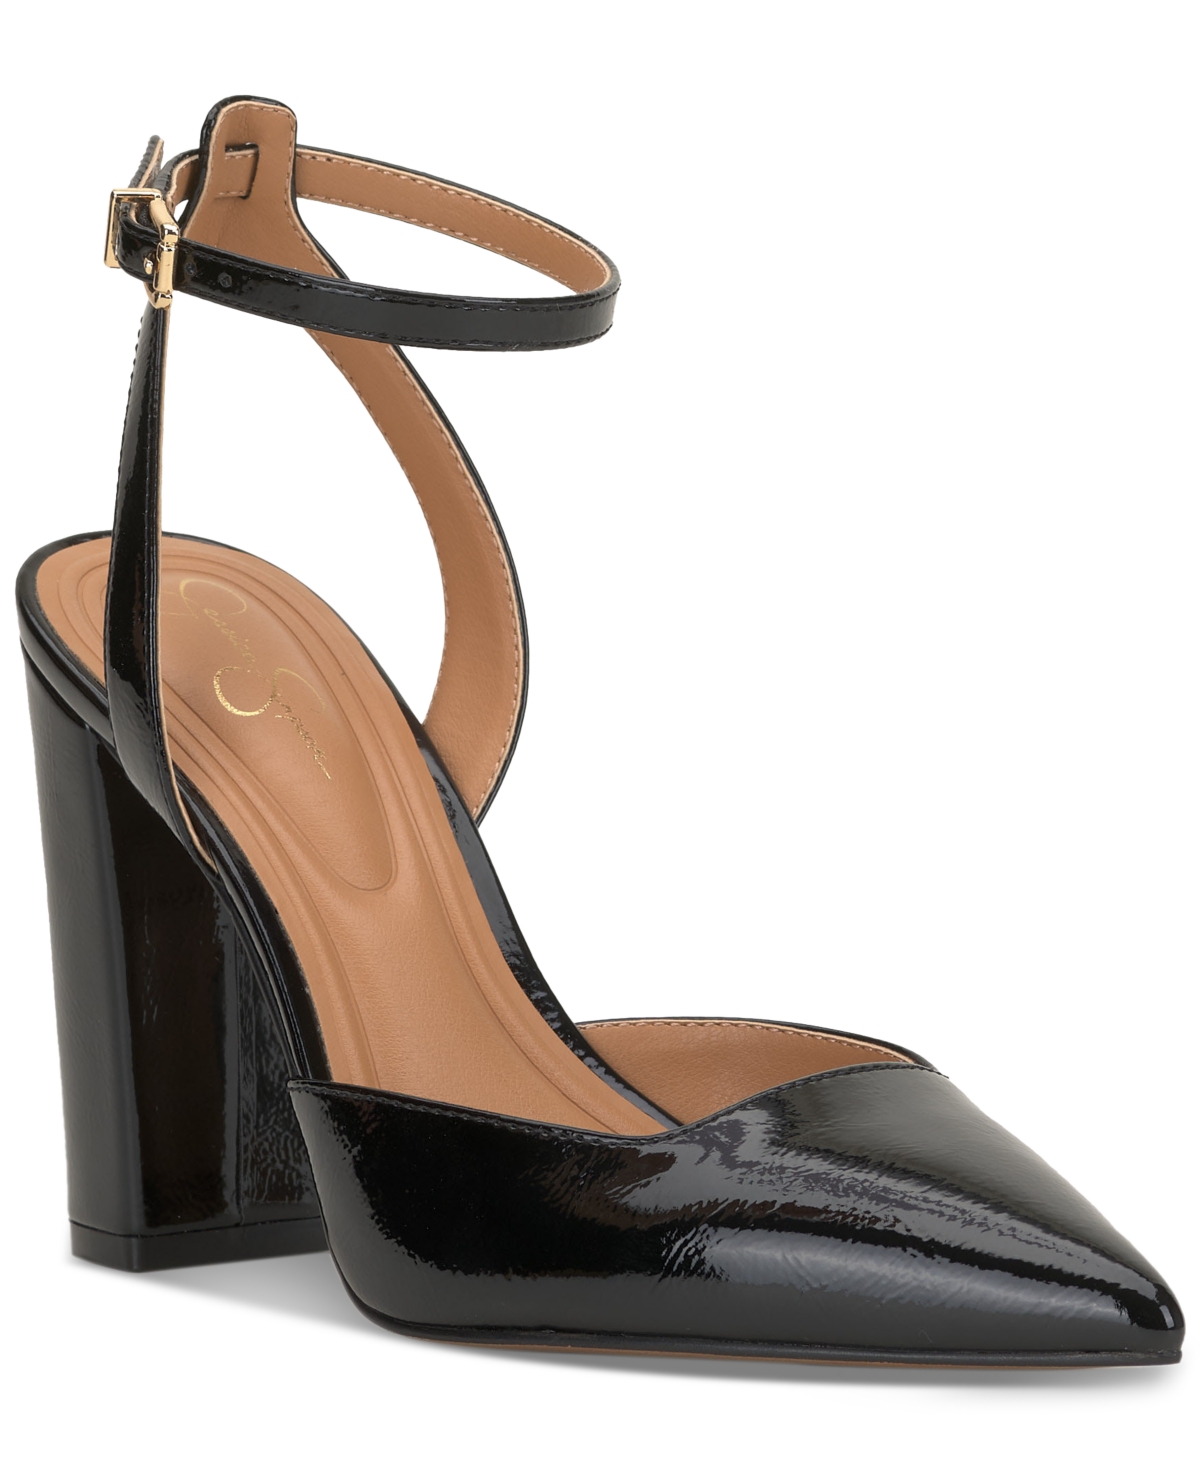 Women's Nazela Ankle Strap Pointed Toe Pumps - Black Patent Faux Leather